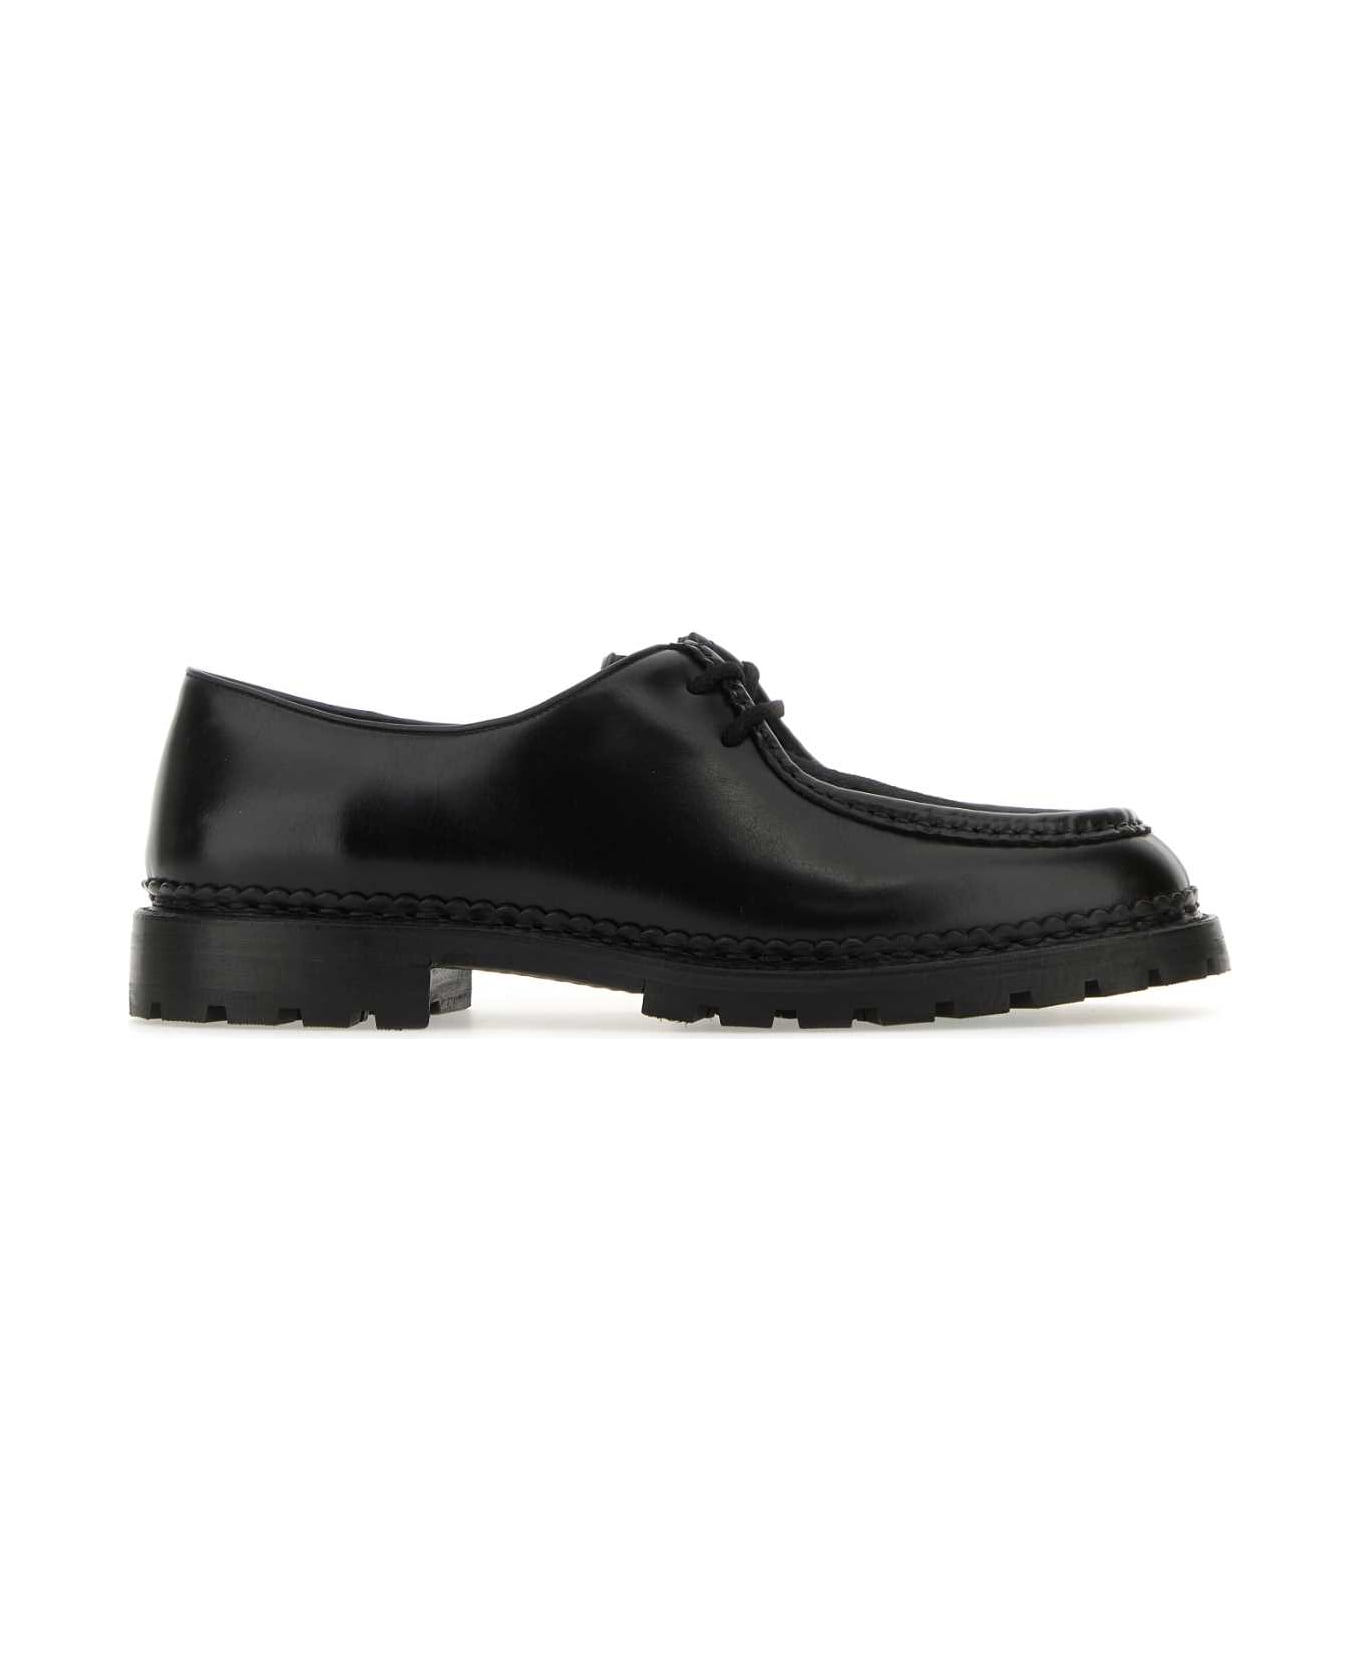 Saint Laurent Leather And Calf Hair Lace-up Shoes - NERONERONERO